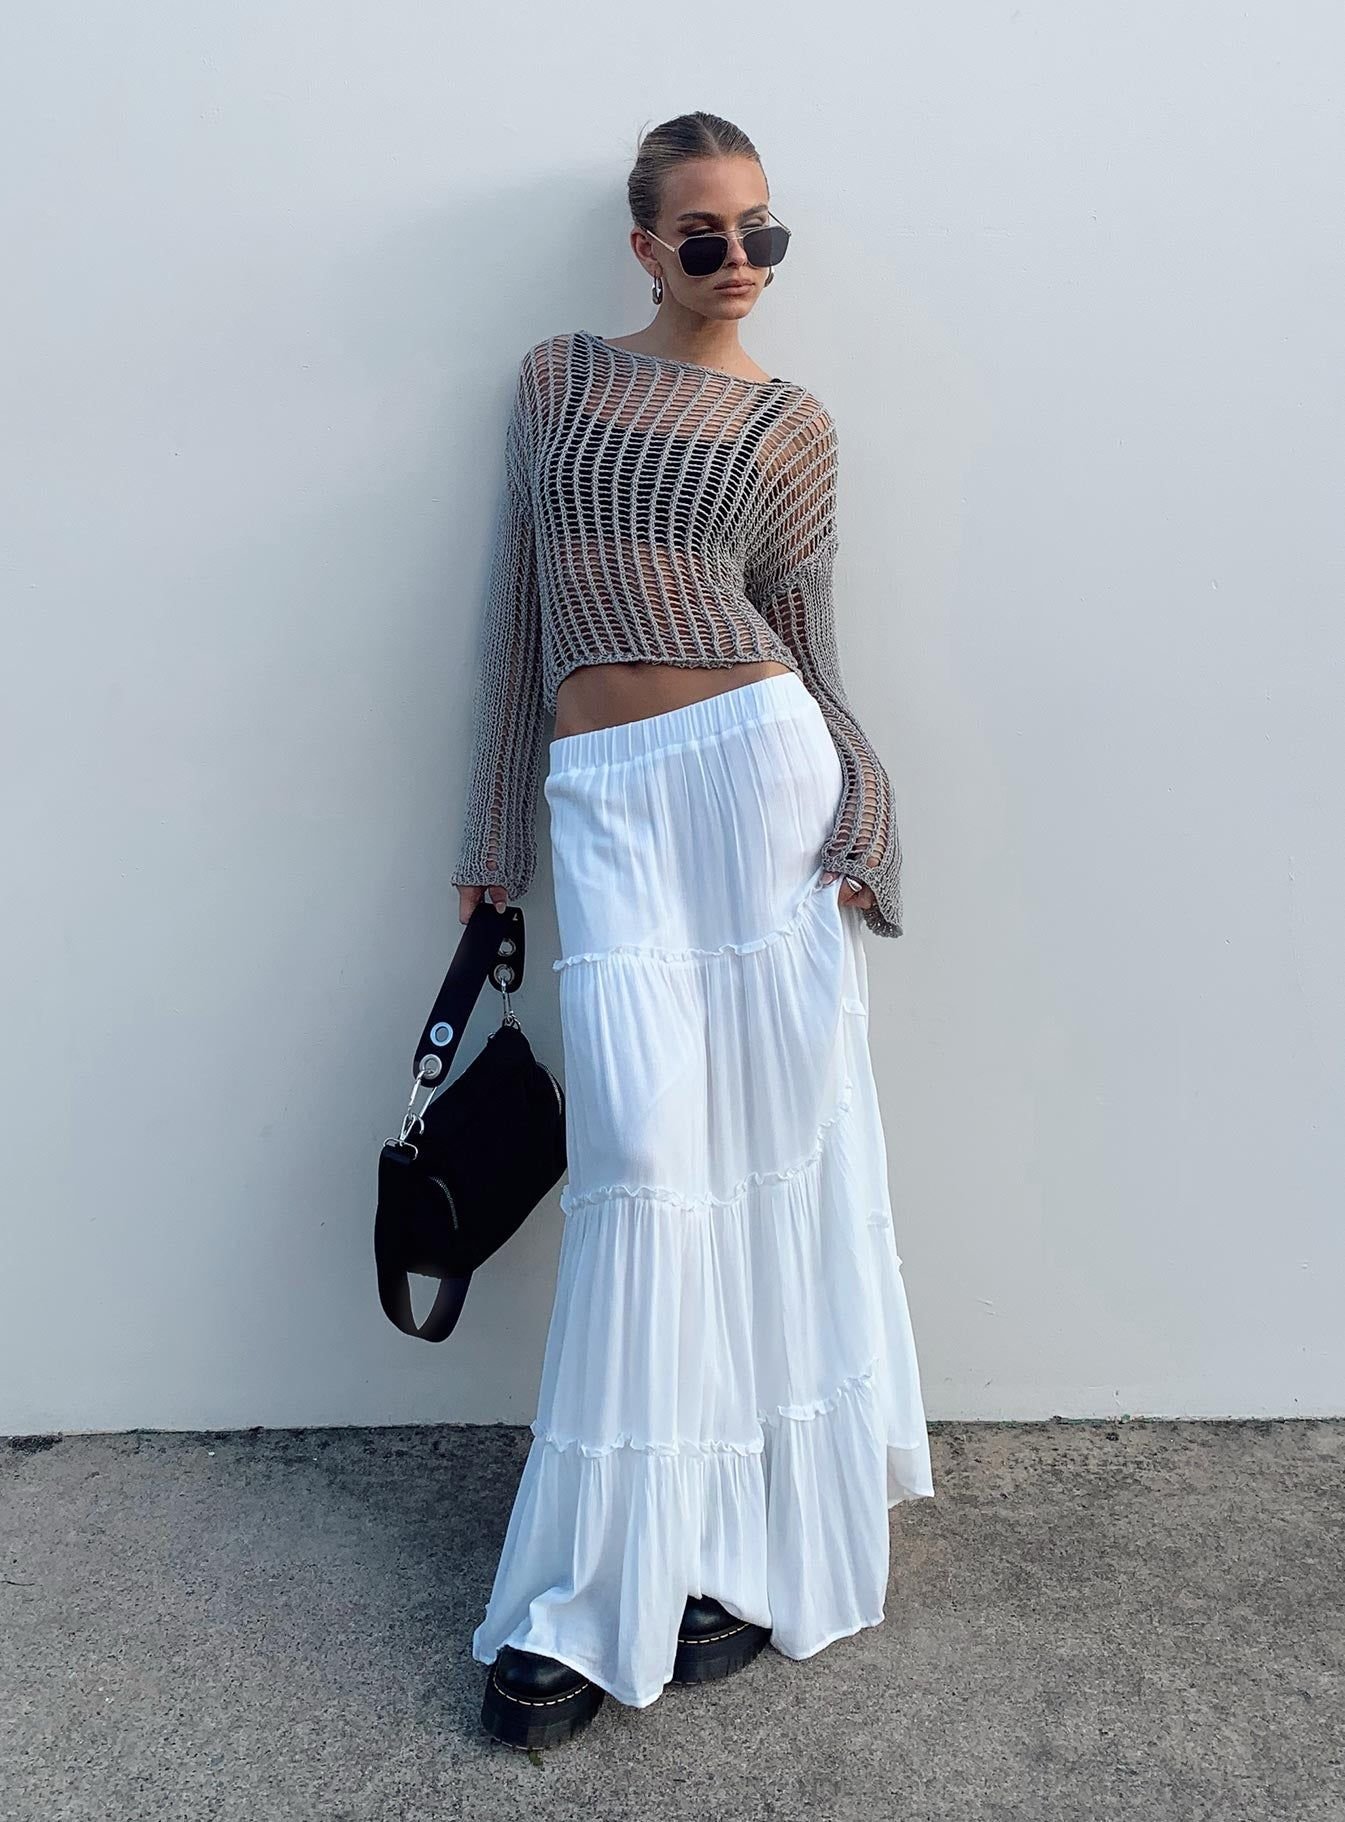 How to wear a maxi skirt on Pinterest